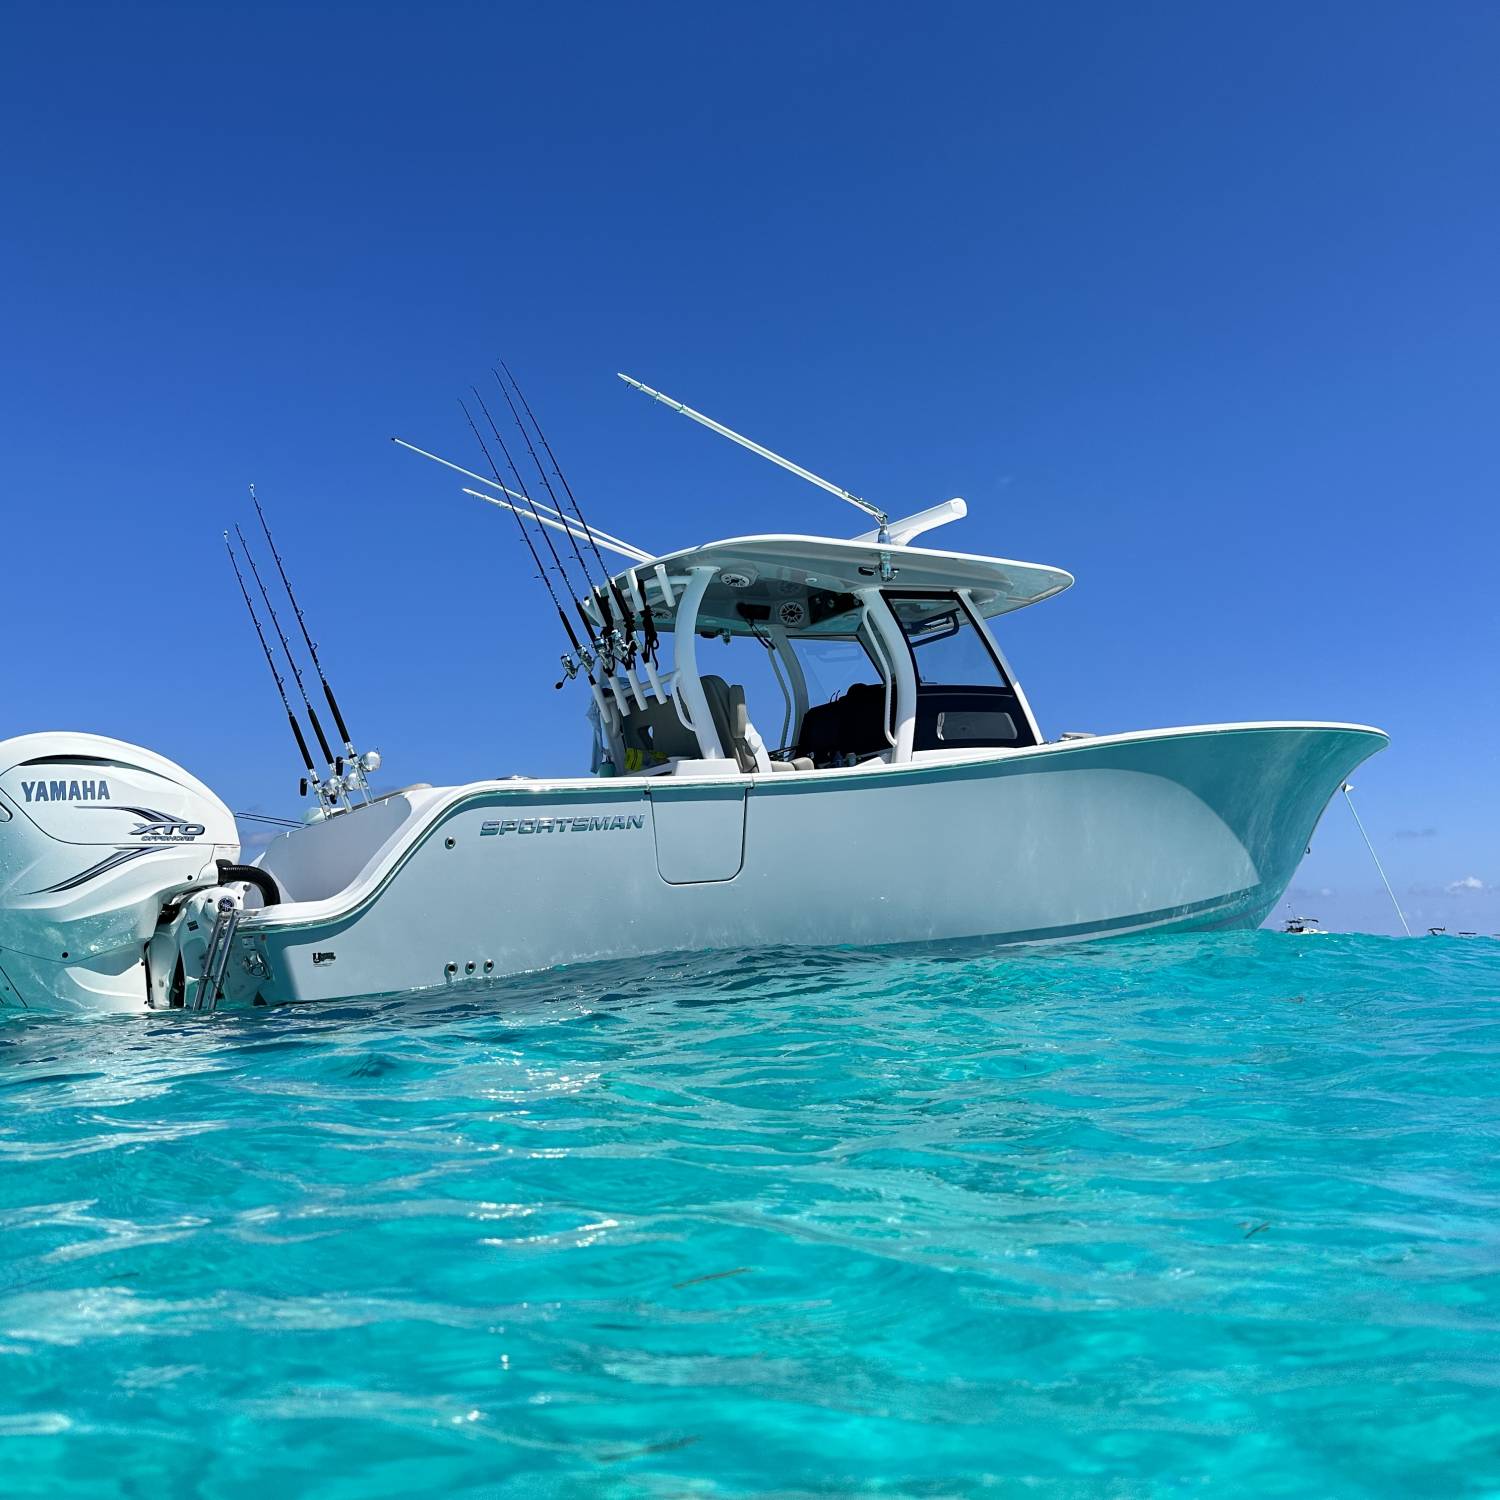 Title: 322 sitting pretty - On board their Sportsman Open 322 Center Console - Location: Alligator reef Islamorada Florida. Participating in the Photo Contest #SportsmanApril2023